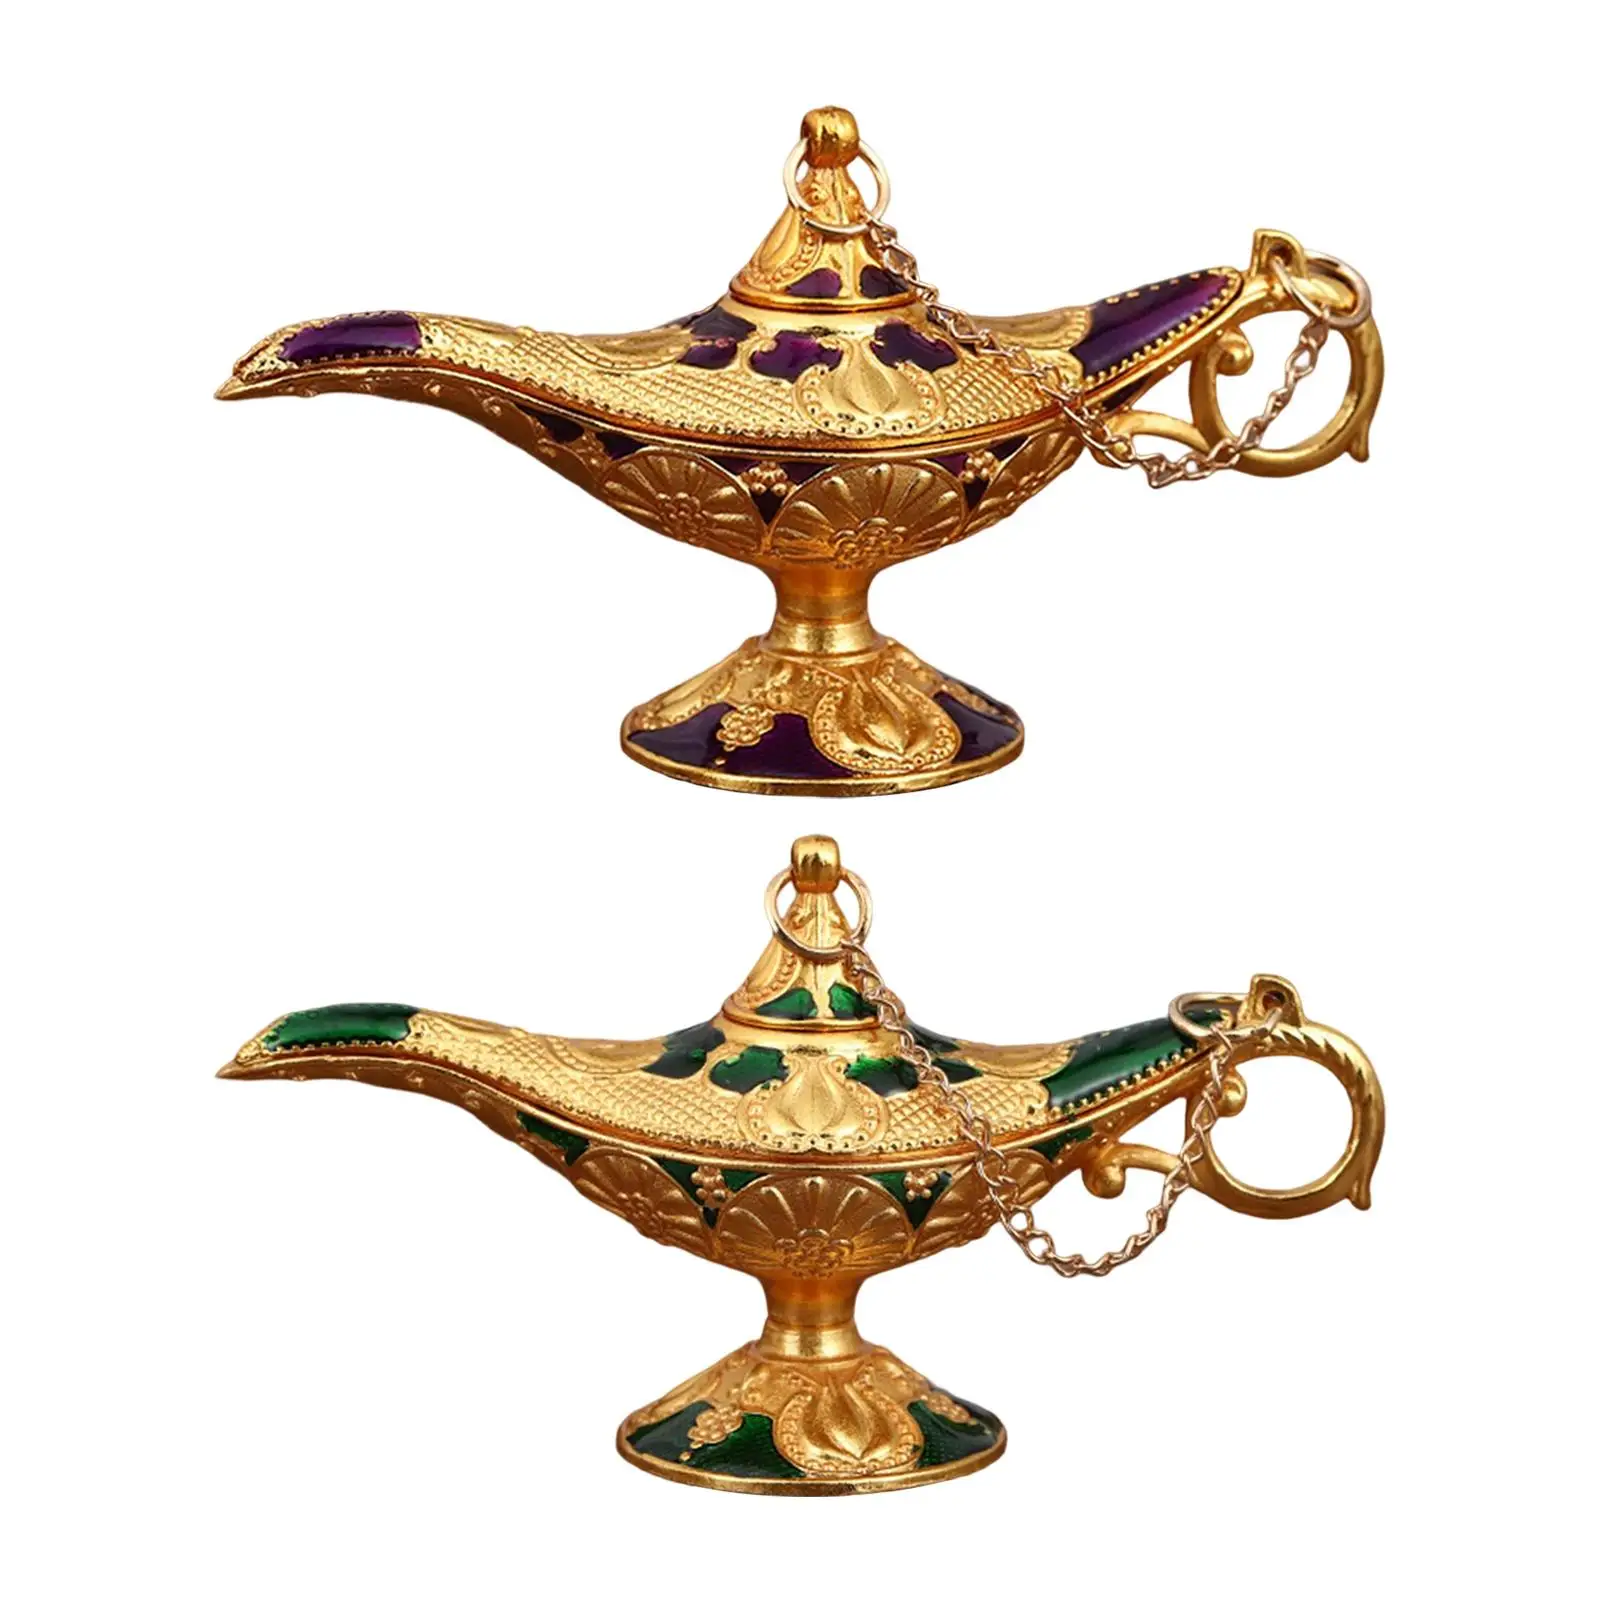 Magic Genie Lamp Decoration Ornament Crafts Luxury Classic for Table Wedding Bedroom Home Decor Party